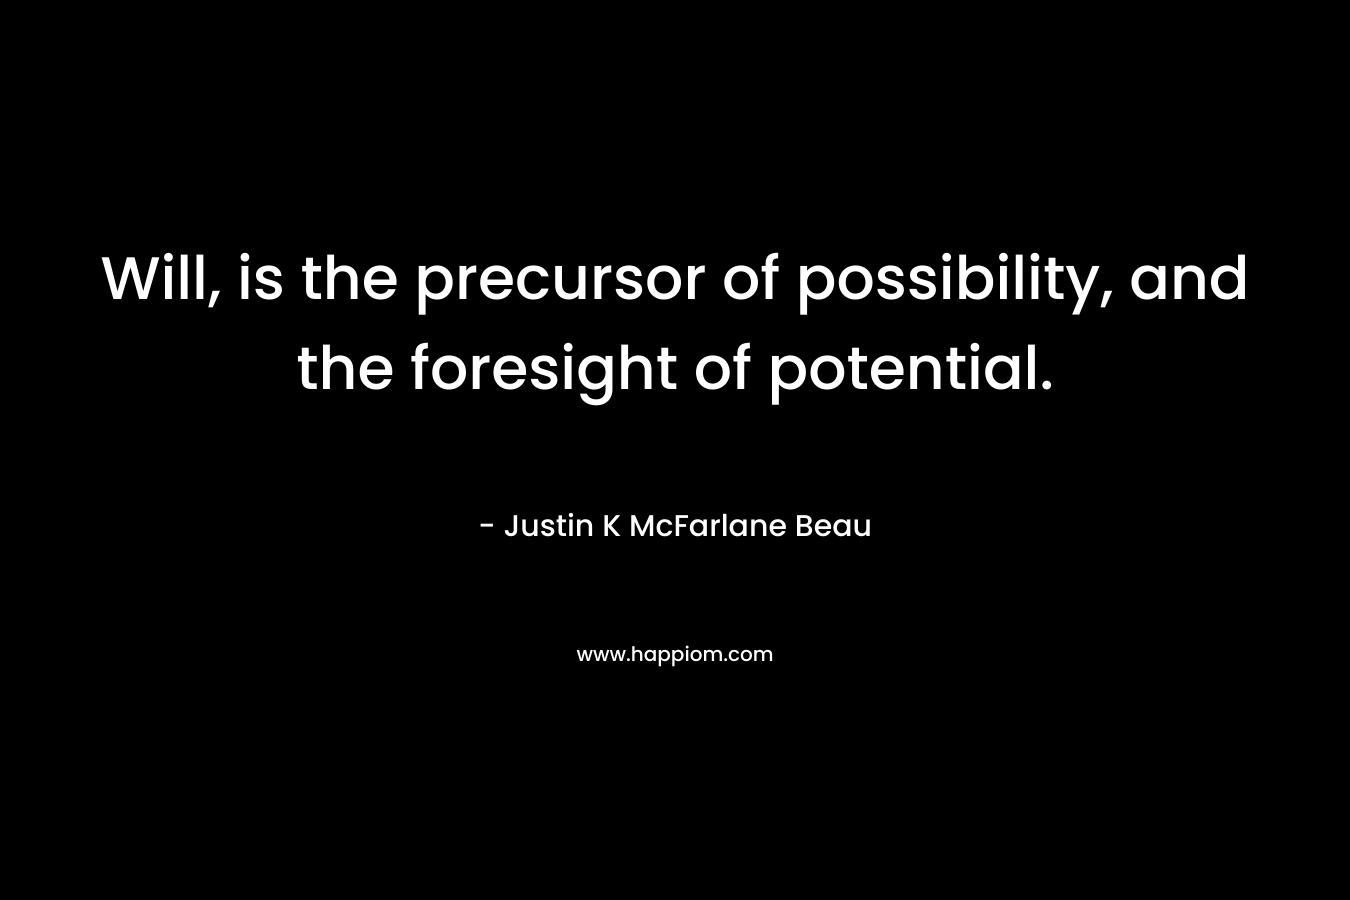 Will, is the precursor of possibility, and the foresight of potential. – Justin K McFarlane Beau